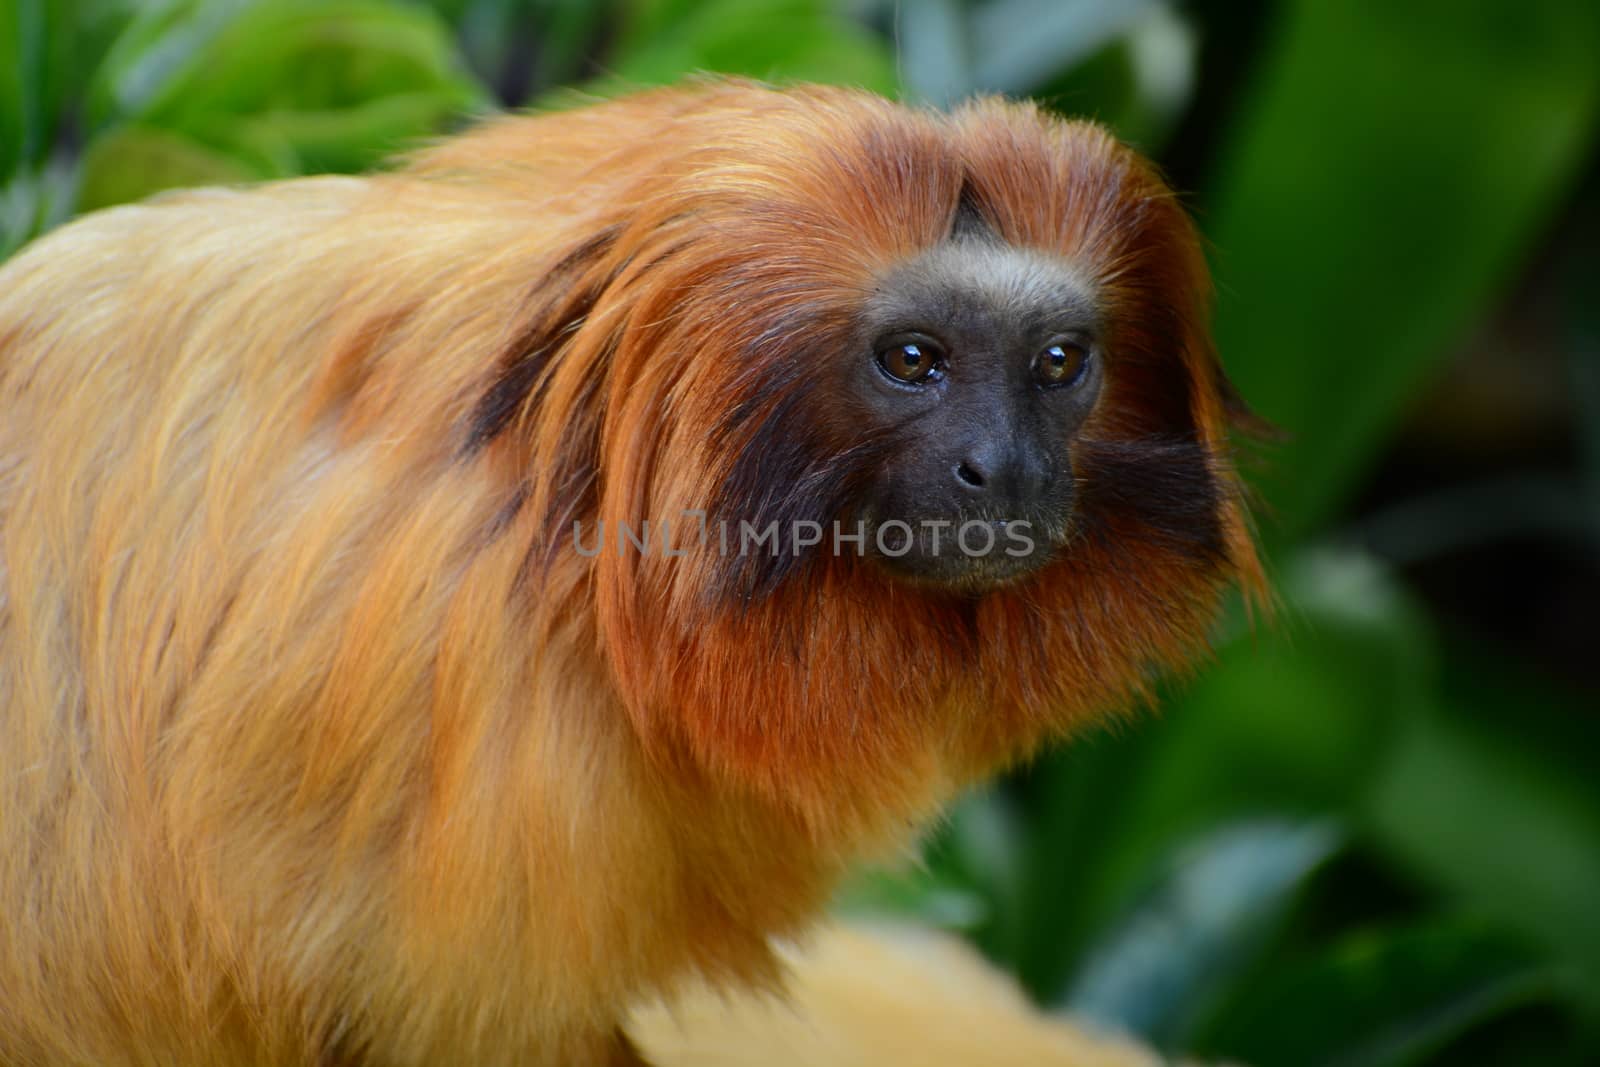 Golden lion tamarins are only found in the lowland forests of Brazil. In the wild, they will live for approximately 15 years, but in zoos they can live up to 20 years.